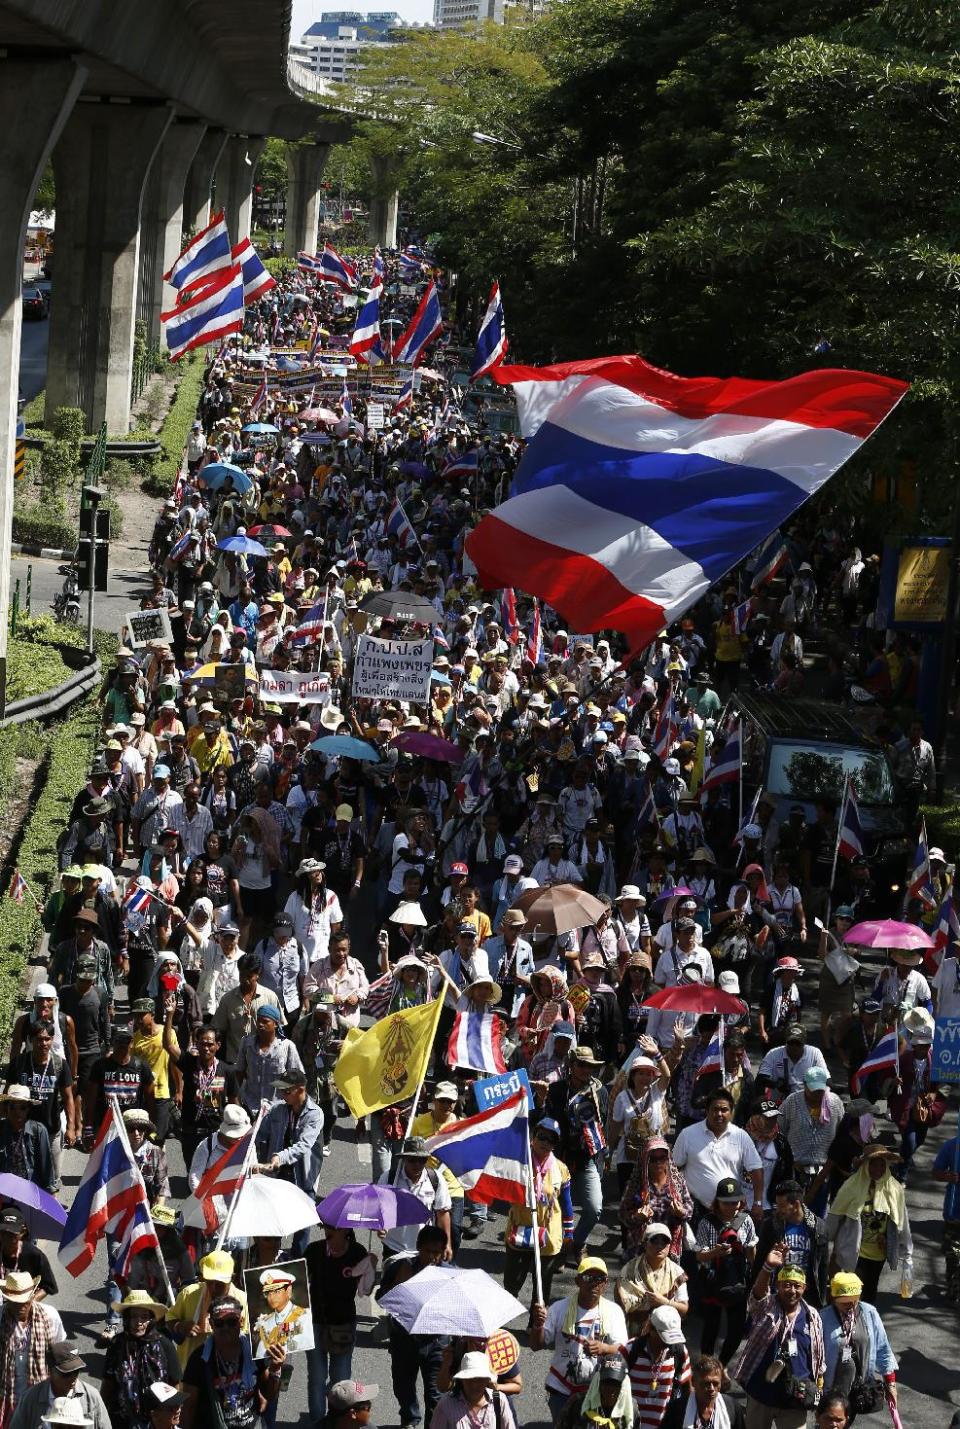 Anti-government protesters march on a main road to the prime minister's office compound in Bangkok, Thailand, Monday, May 12, 2014. The battle for who holds Thailand's seat of power took on a new twist Monday as leader of anti-government protests Suthep Thaugsuban planned to set up his office at the vacated Government House while the country's new caretaker leader worked from a makeshift, suburban outpost. (AP Photo/Vincent Thian)